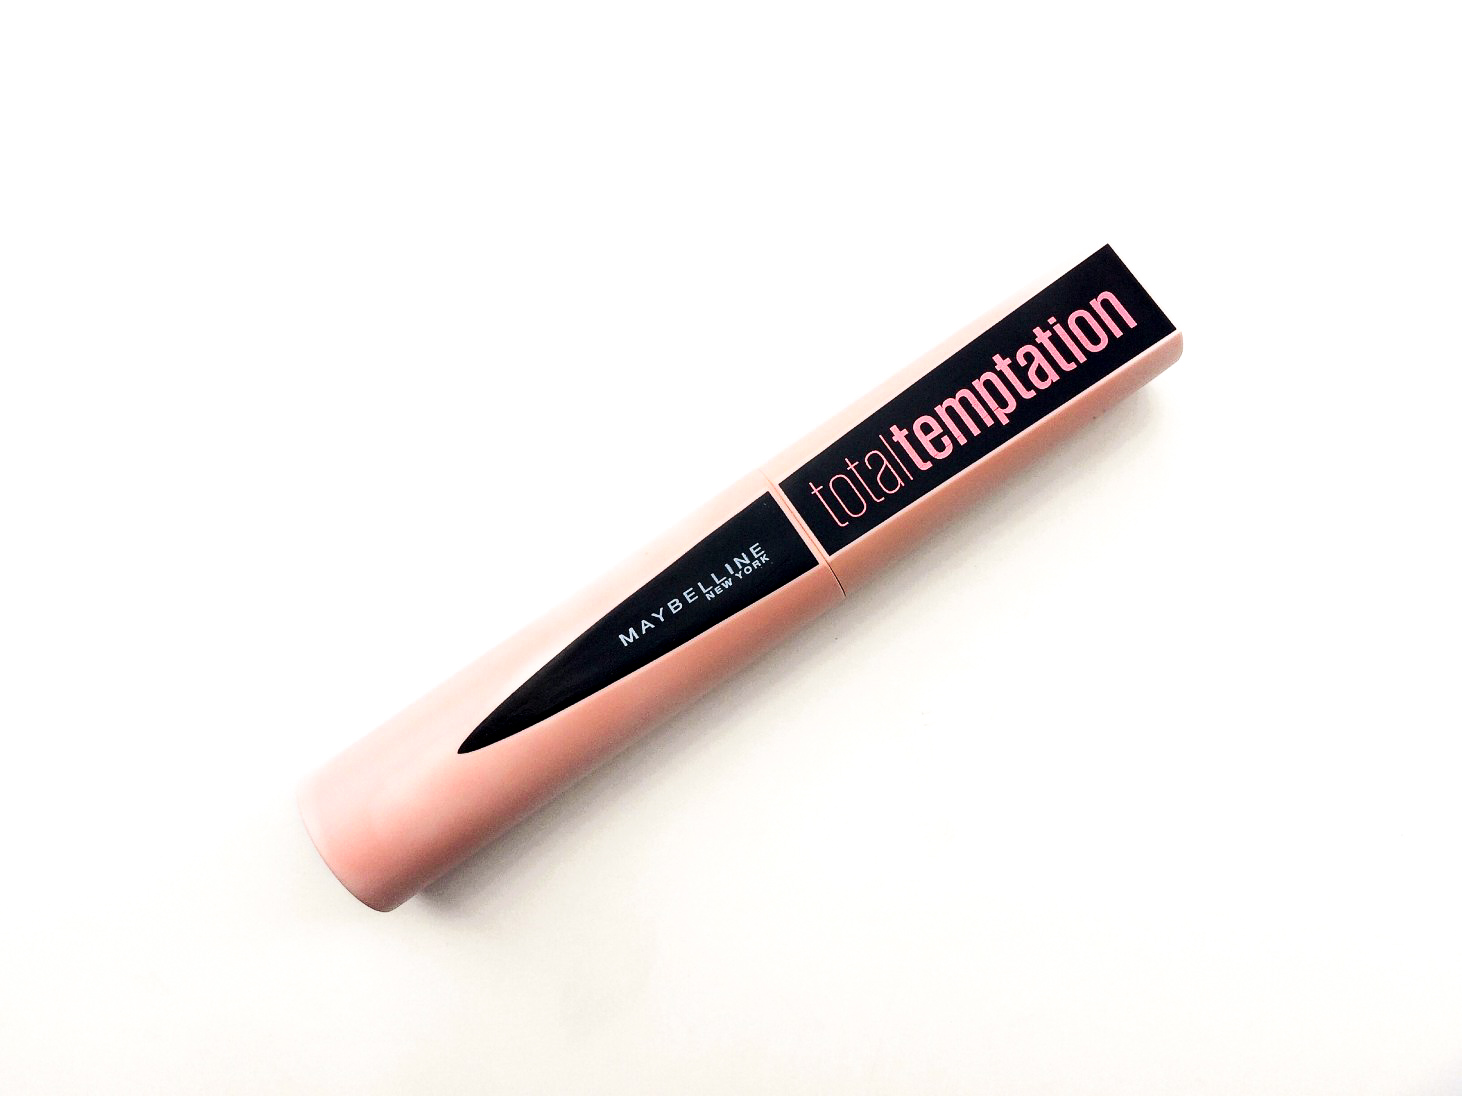 Maybelline Total Temptation Mascara Review 1